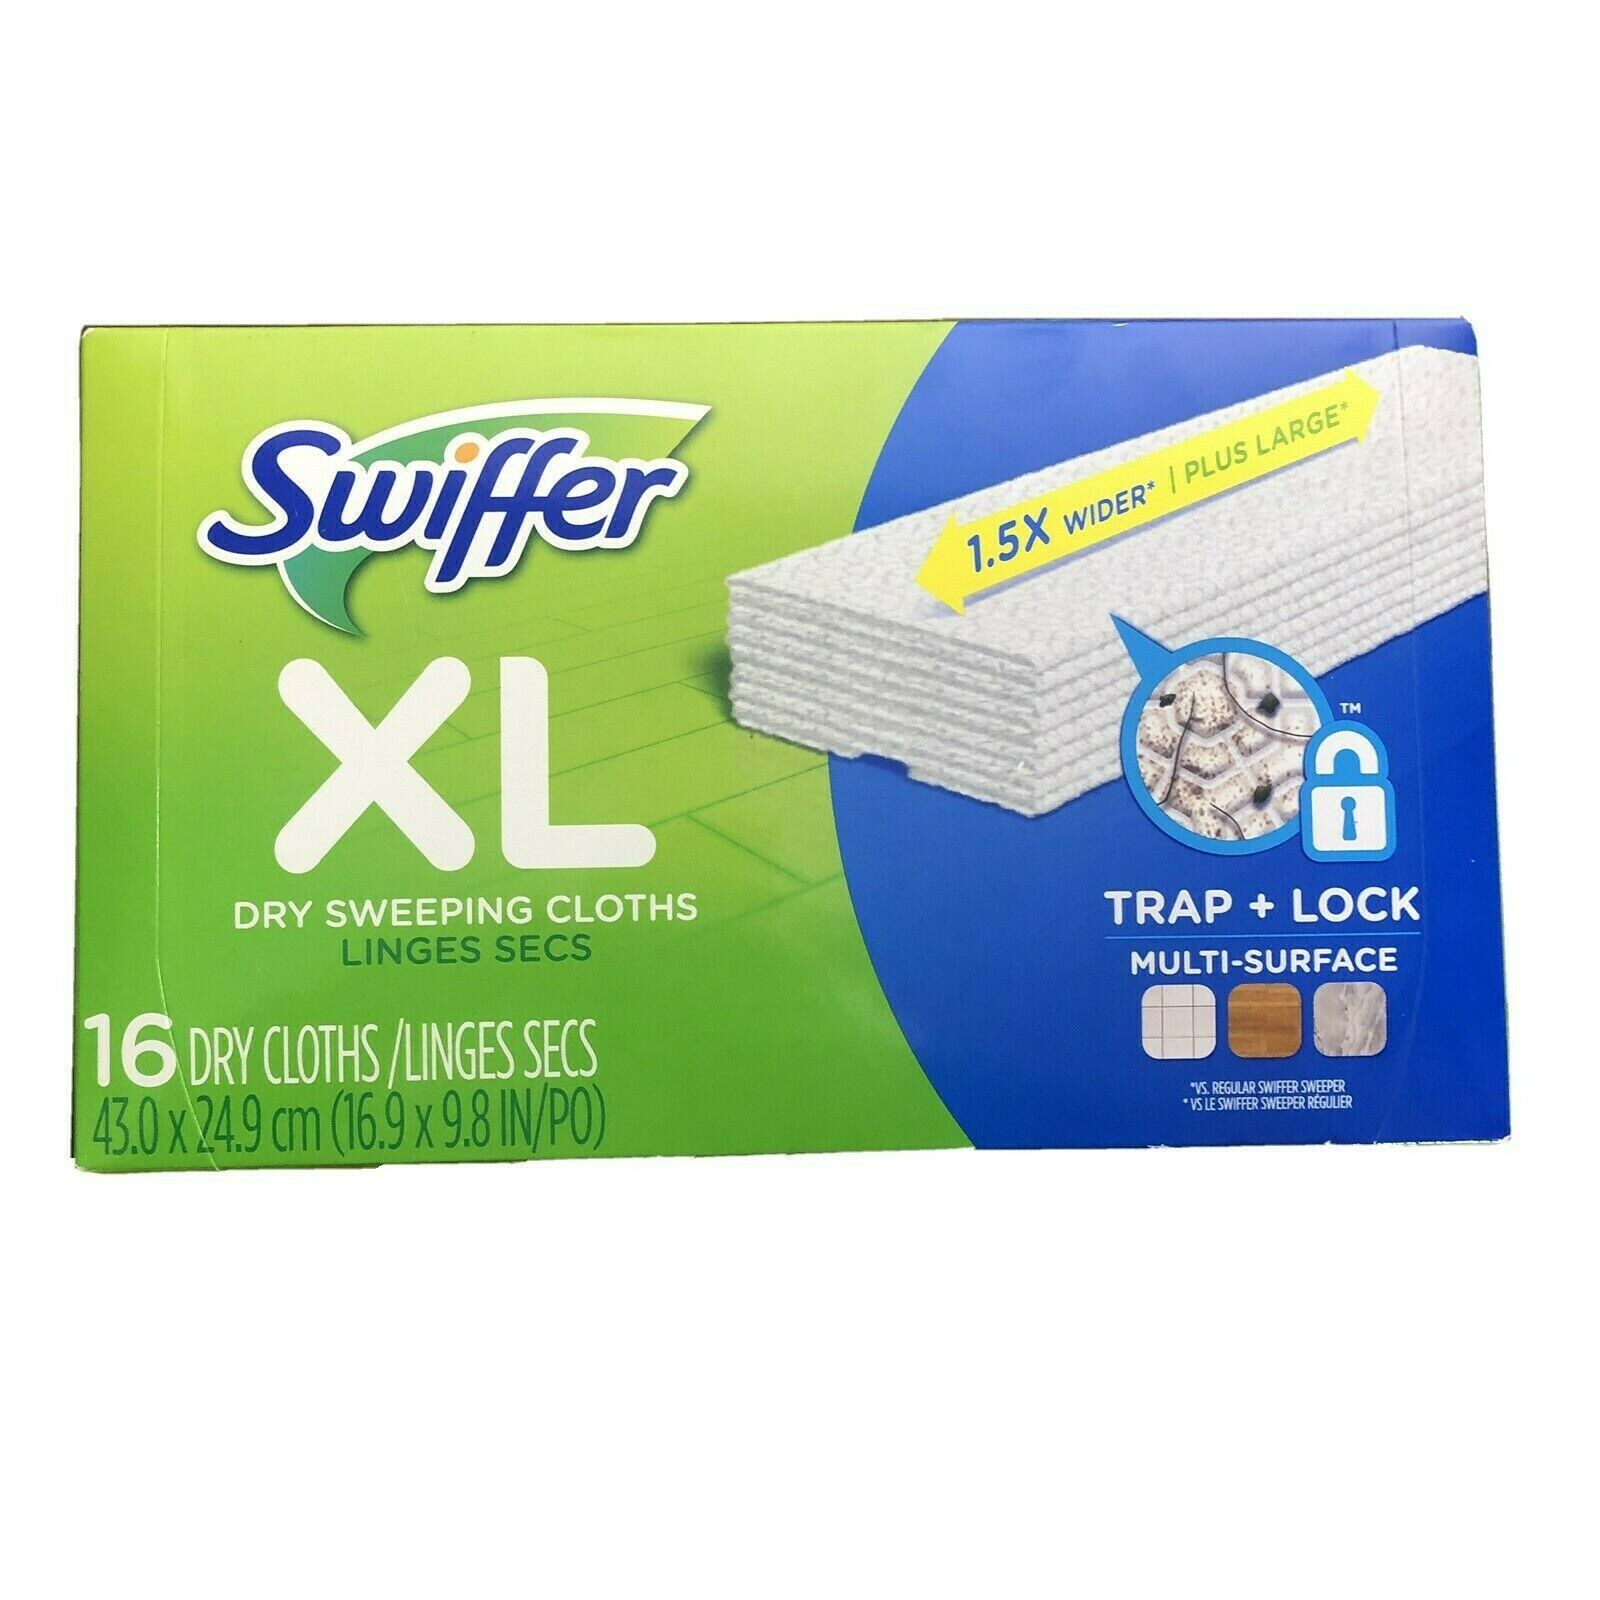 New Swiffer Sweeper Xl Dry Sweeping Cloths Pad Refill 19 Dry Cloths Unscented